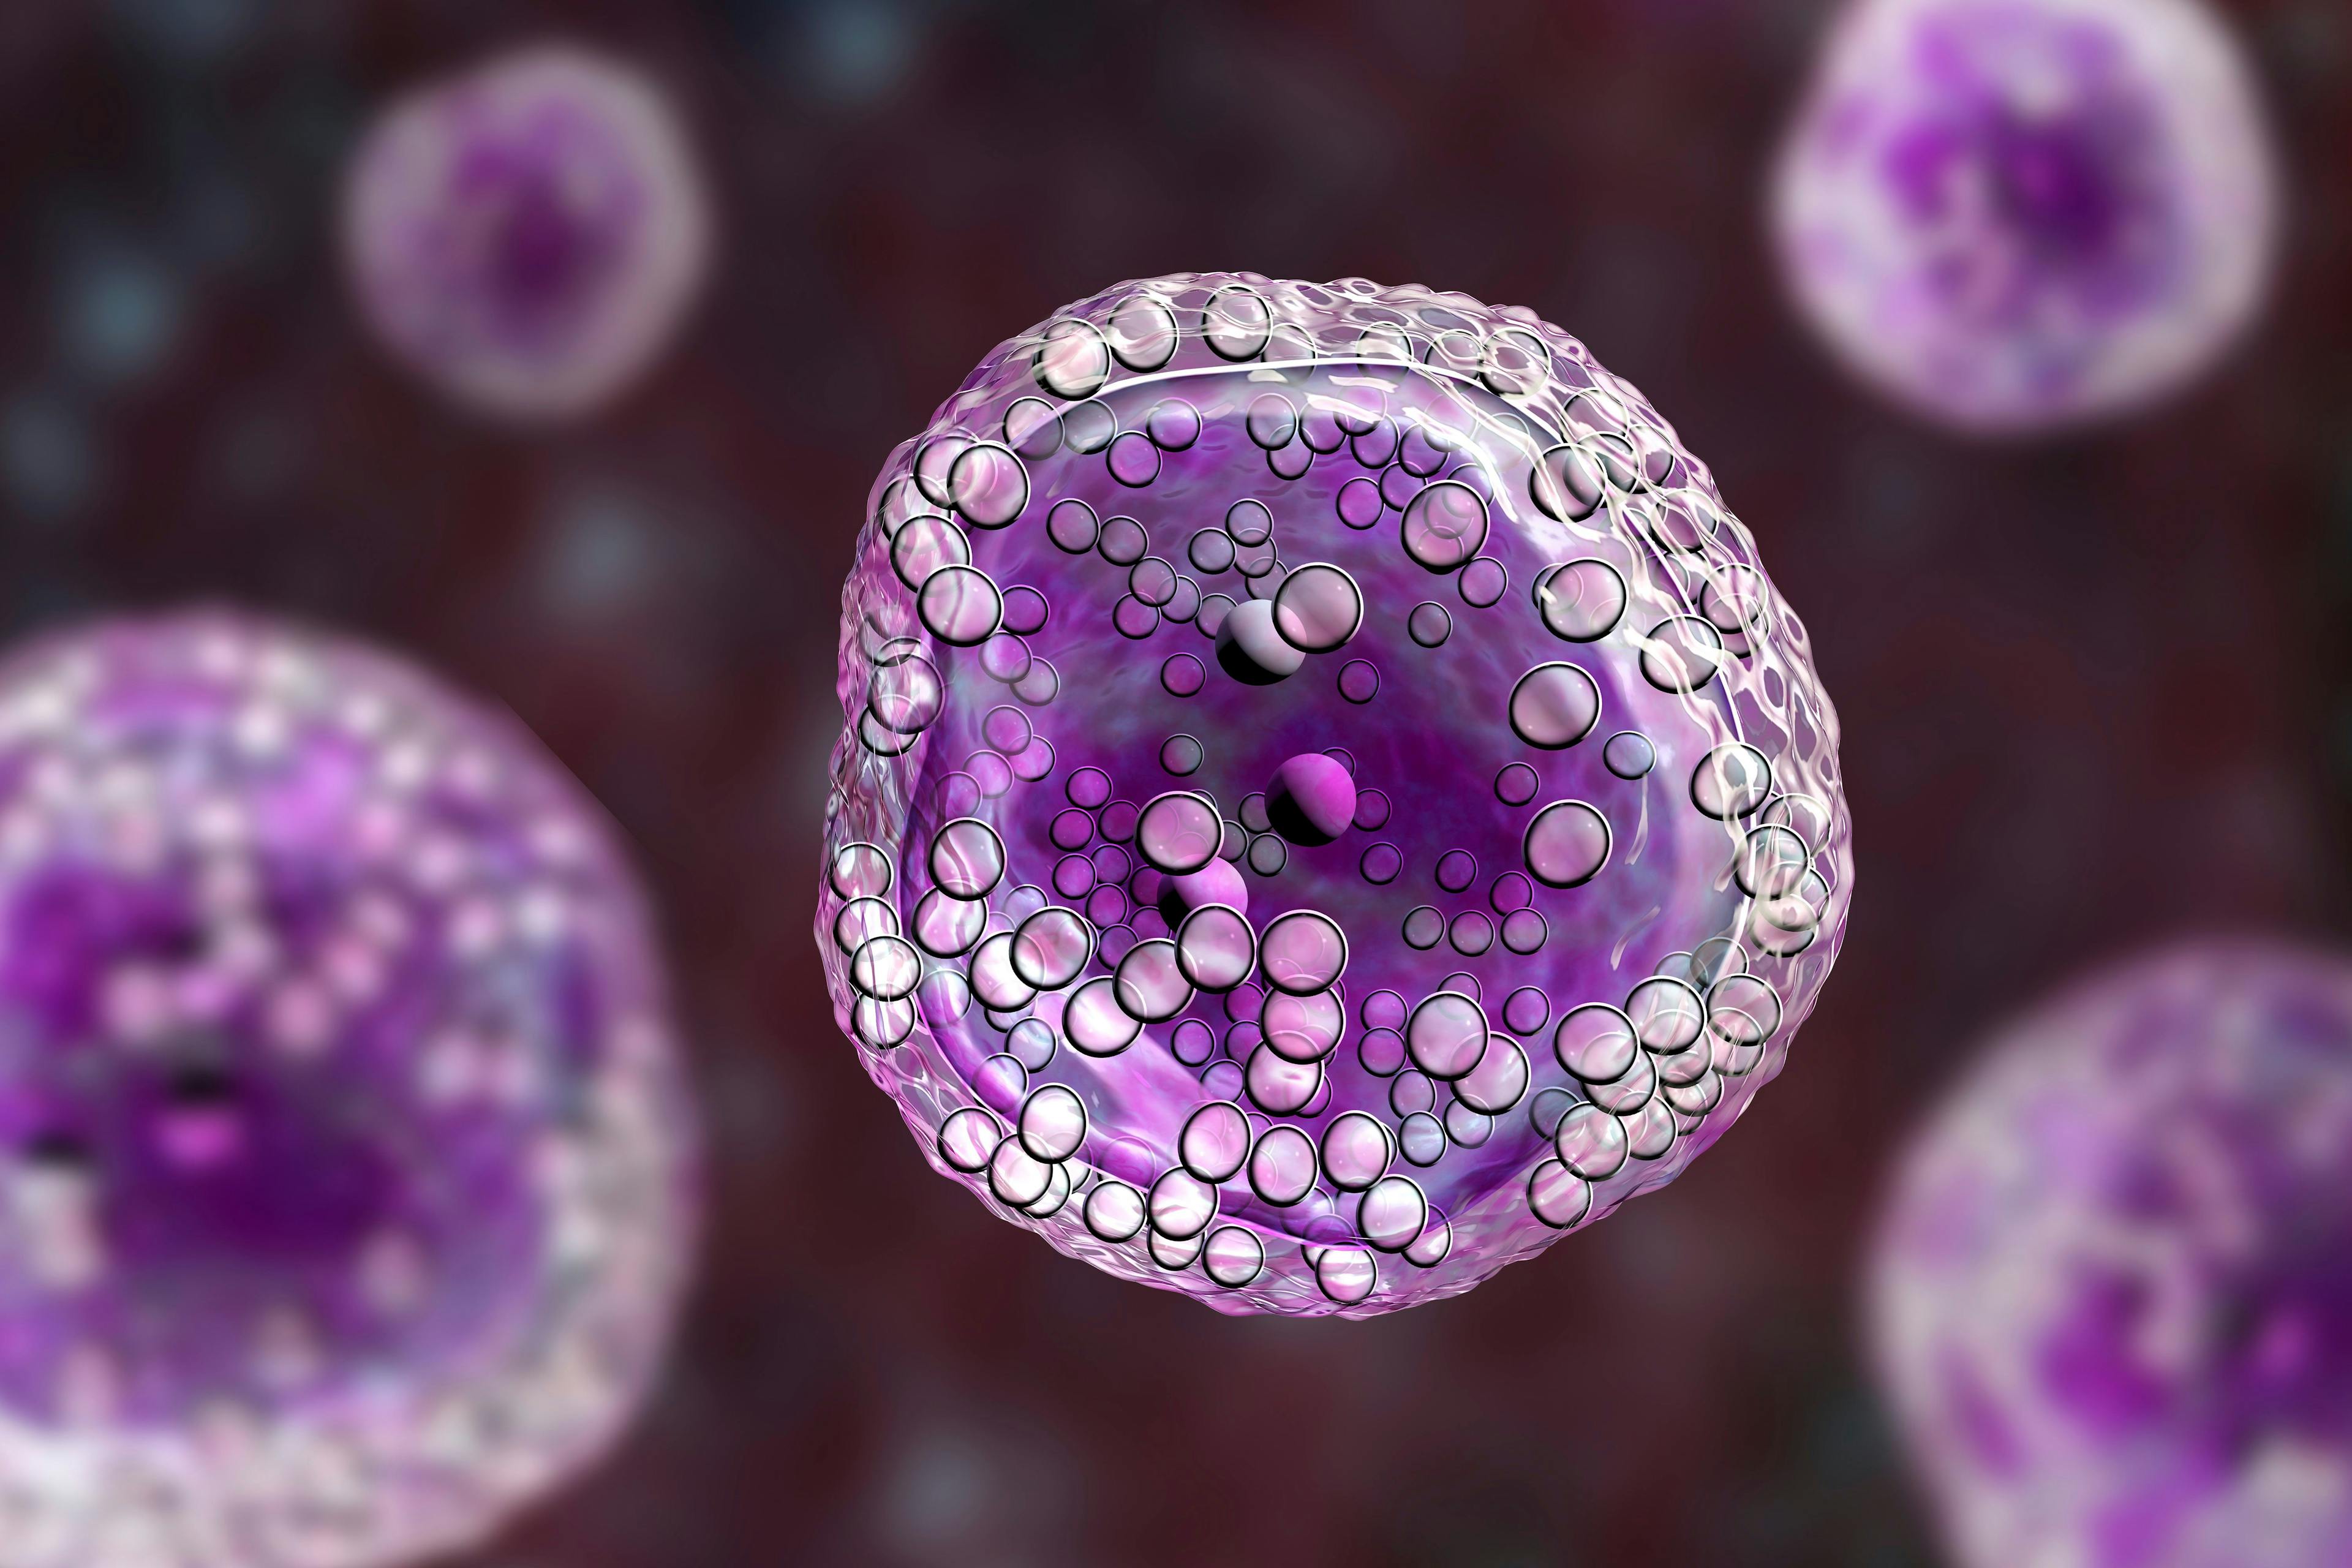 Lymphoma cell, a cancer of the lymphatic system: © Dr_Microbe - stock.adobe.com